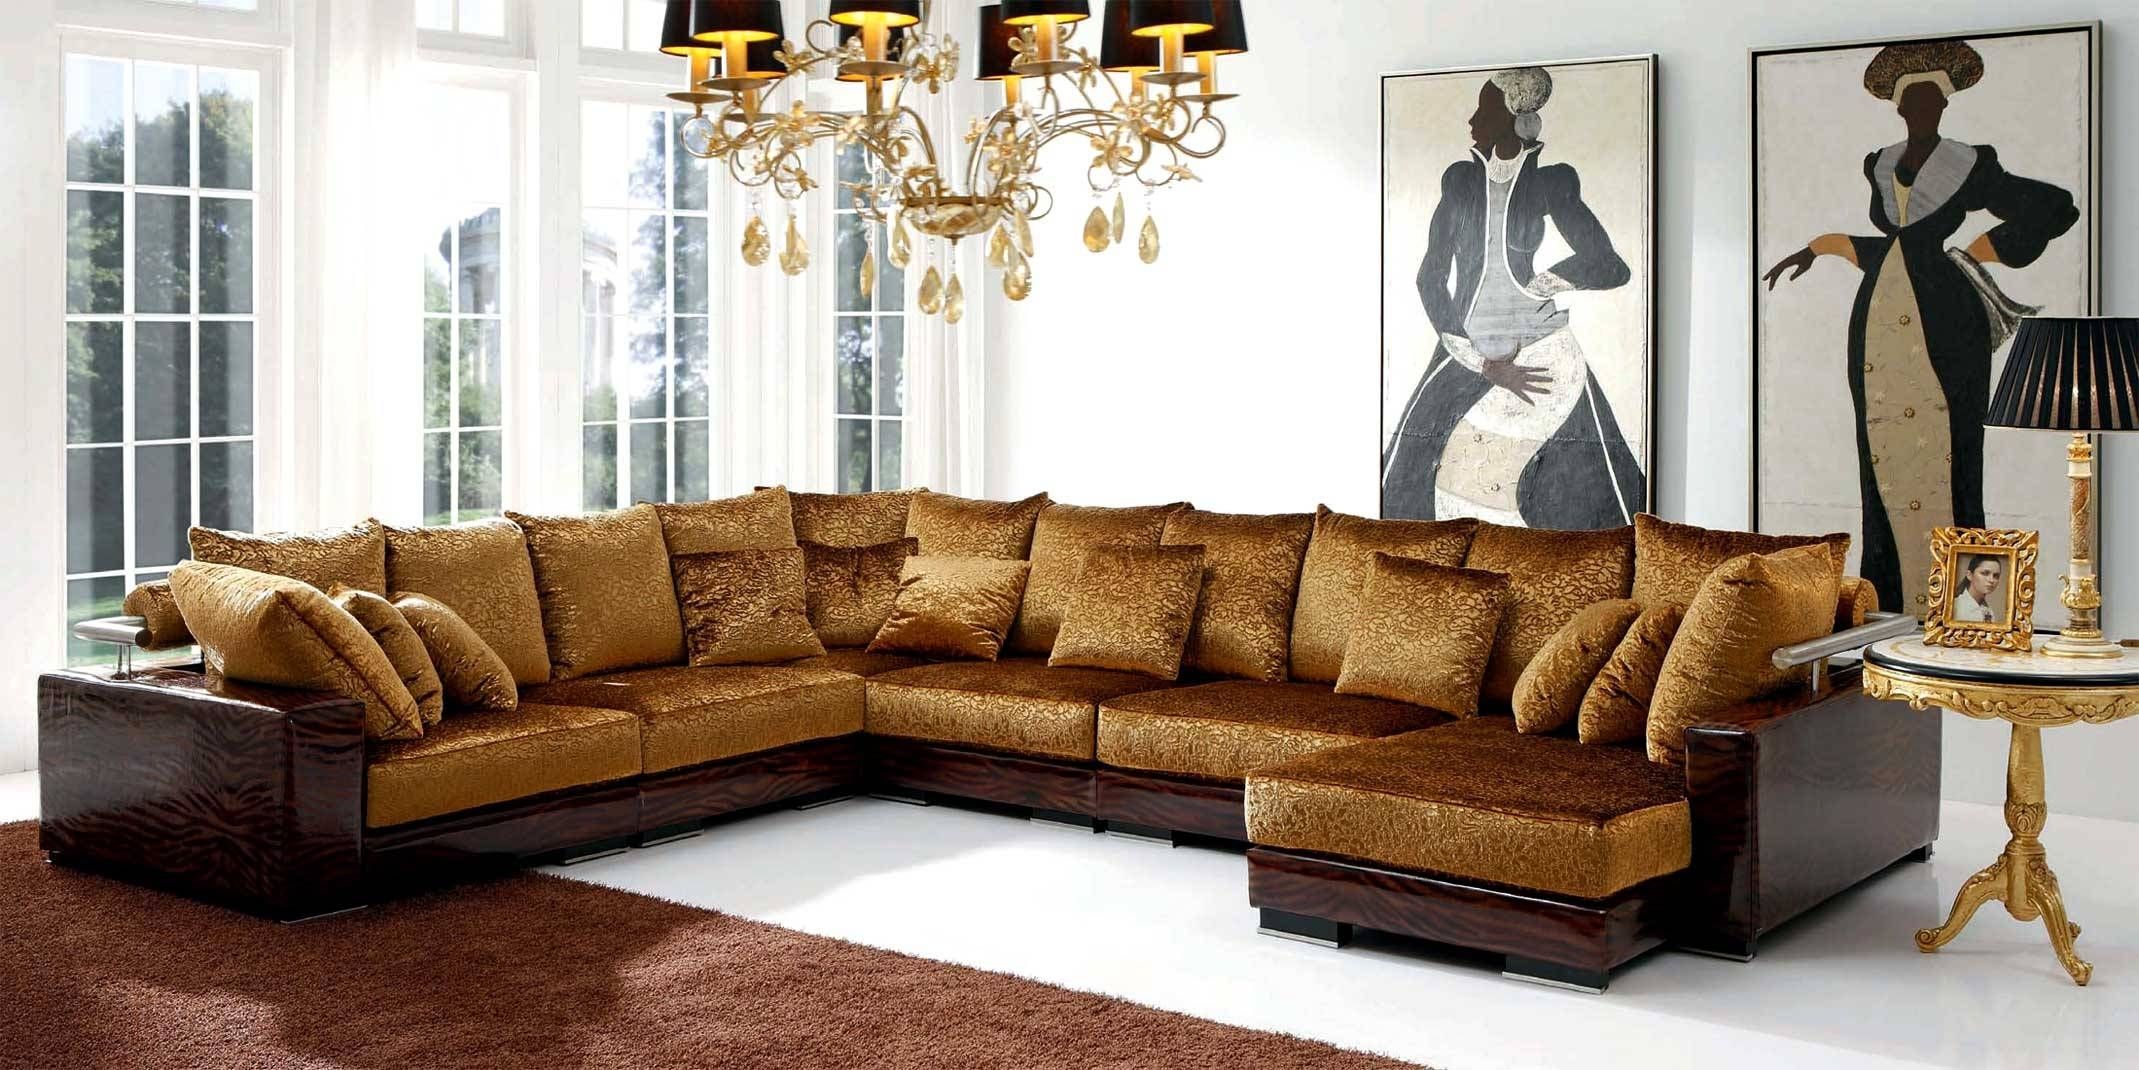 Expensive Sectional Sofas – Leather Sectional Sofa Intended For Expensive Sectional Sofas (View 2 of 30)